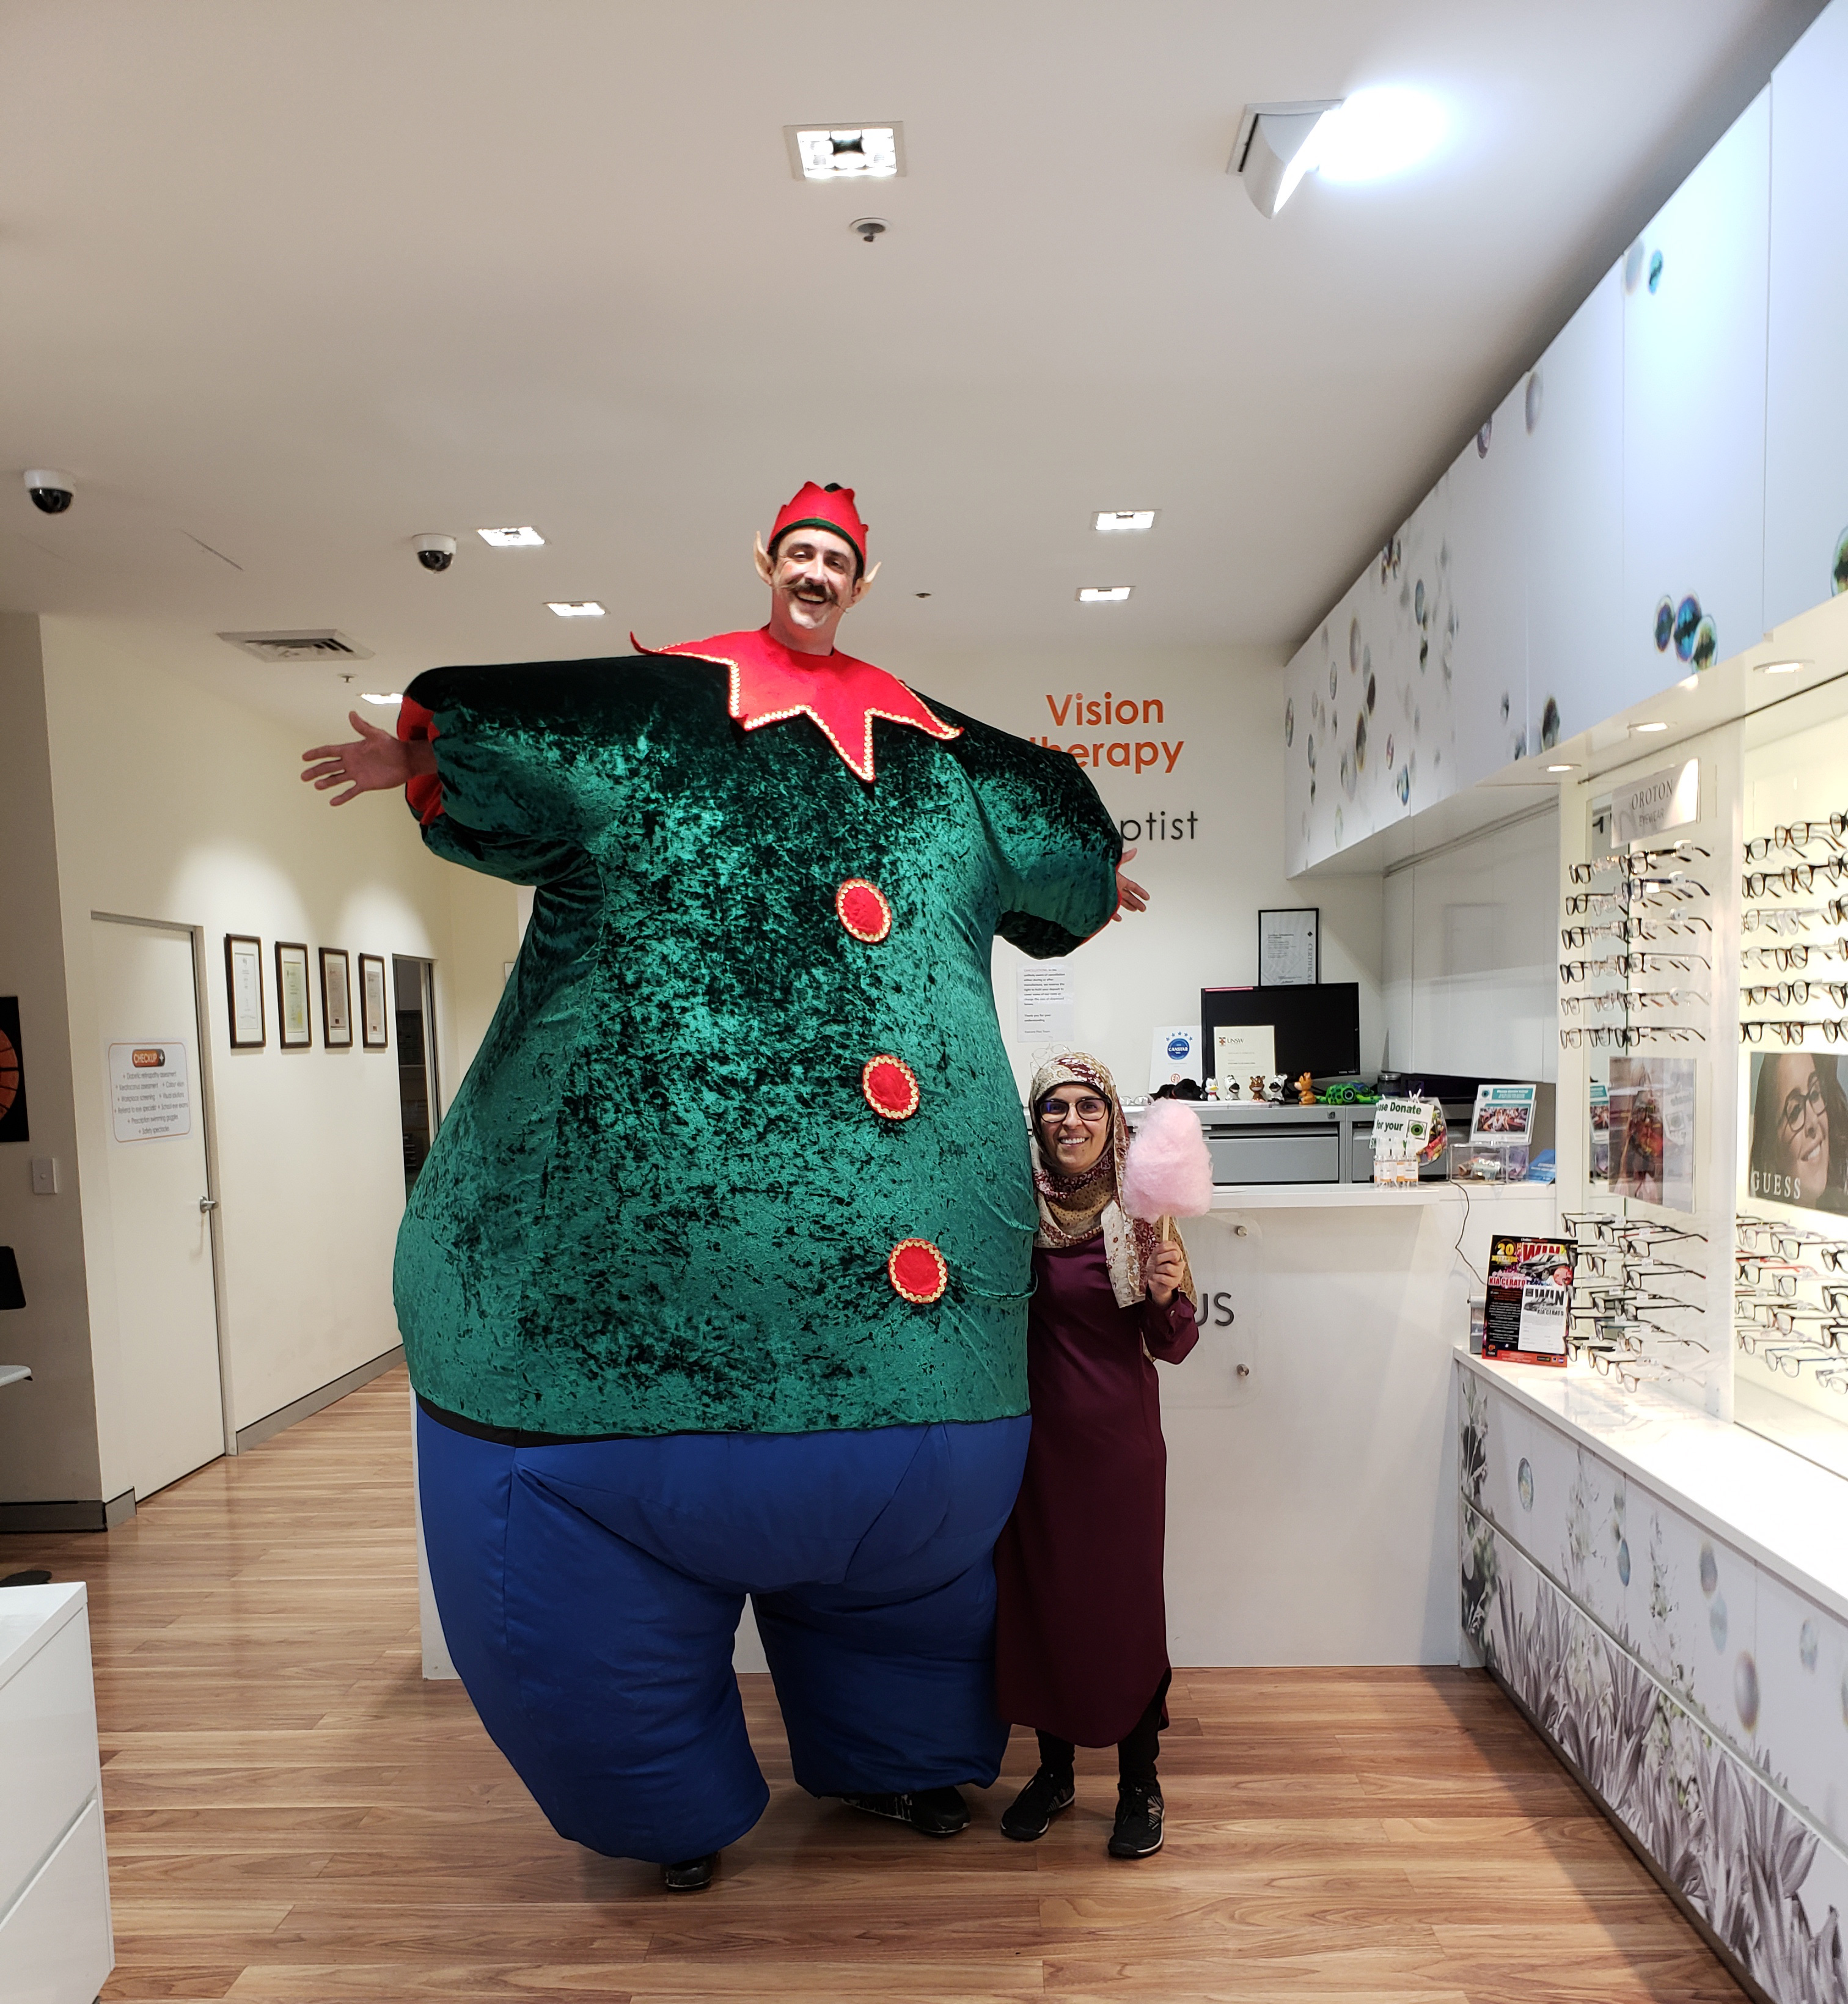 Mr. Giant Elf got his eyes tested at Eyecare Plus Chullora.